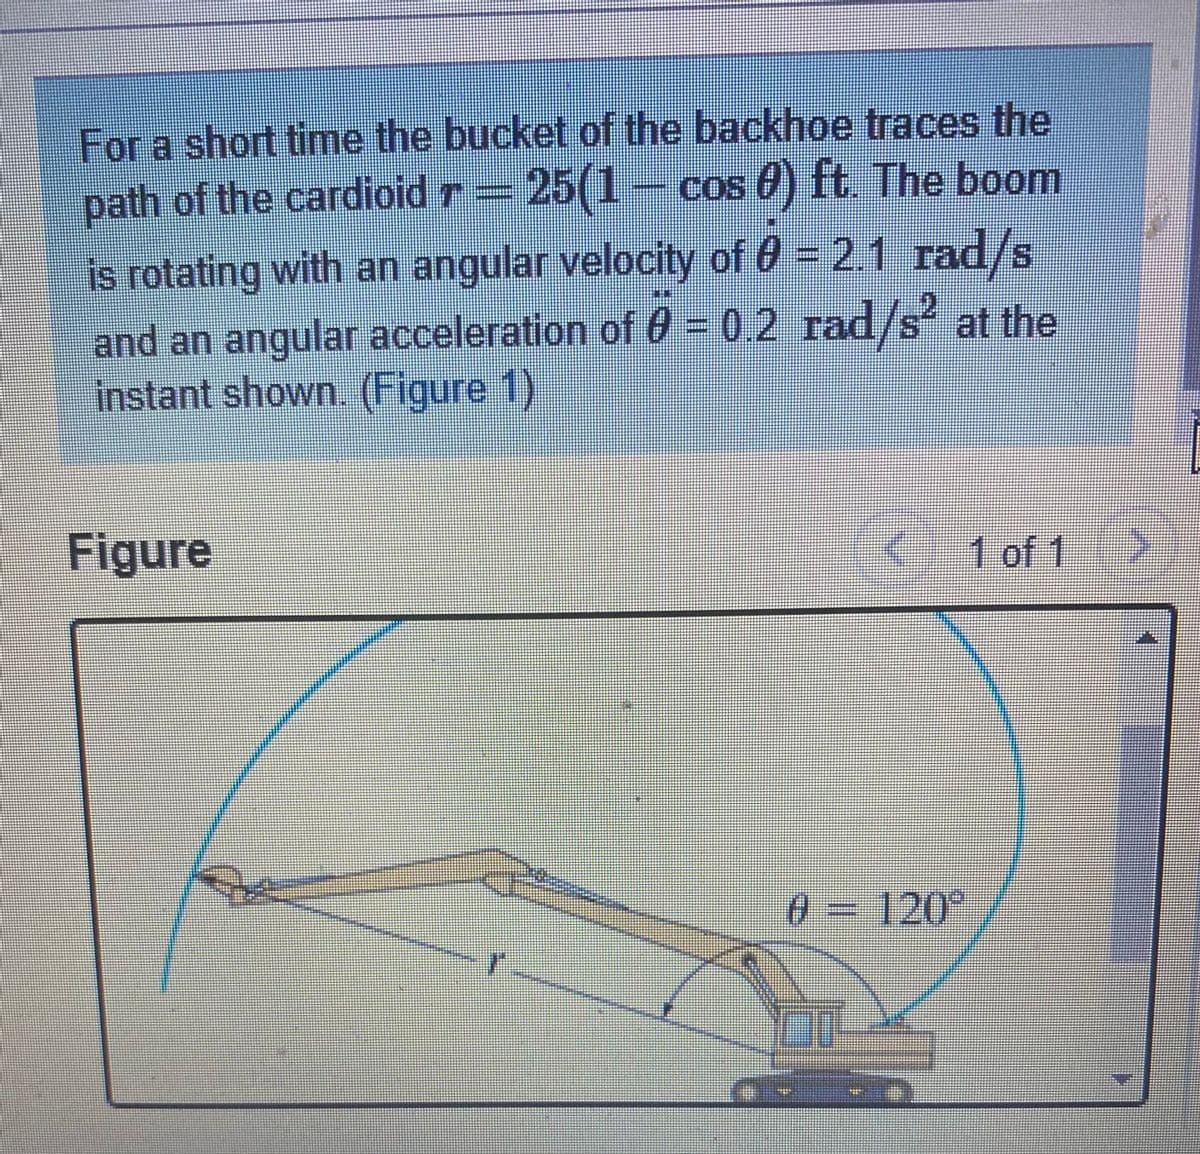 For a short time the bucket of the backhoe traces the
path of the cardioid r = 25(1- cos 0) ft. The boom
is rotating with an angular velocity of 0 = 2.1 rad/s
and an angular acceleration of 0 = 0,2 rad/s at the
instant shown. (Figure 1)
Figure
1 of 1
03
120°
